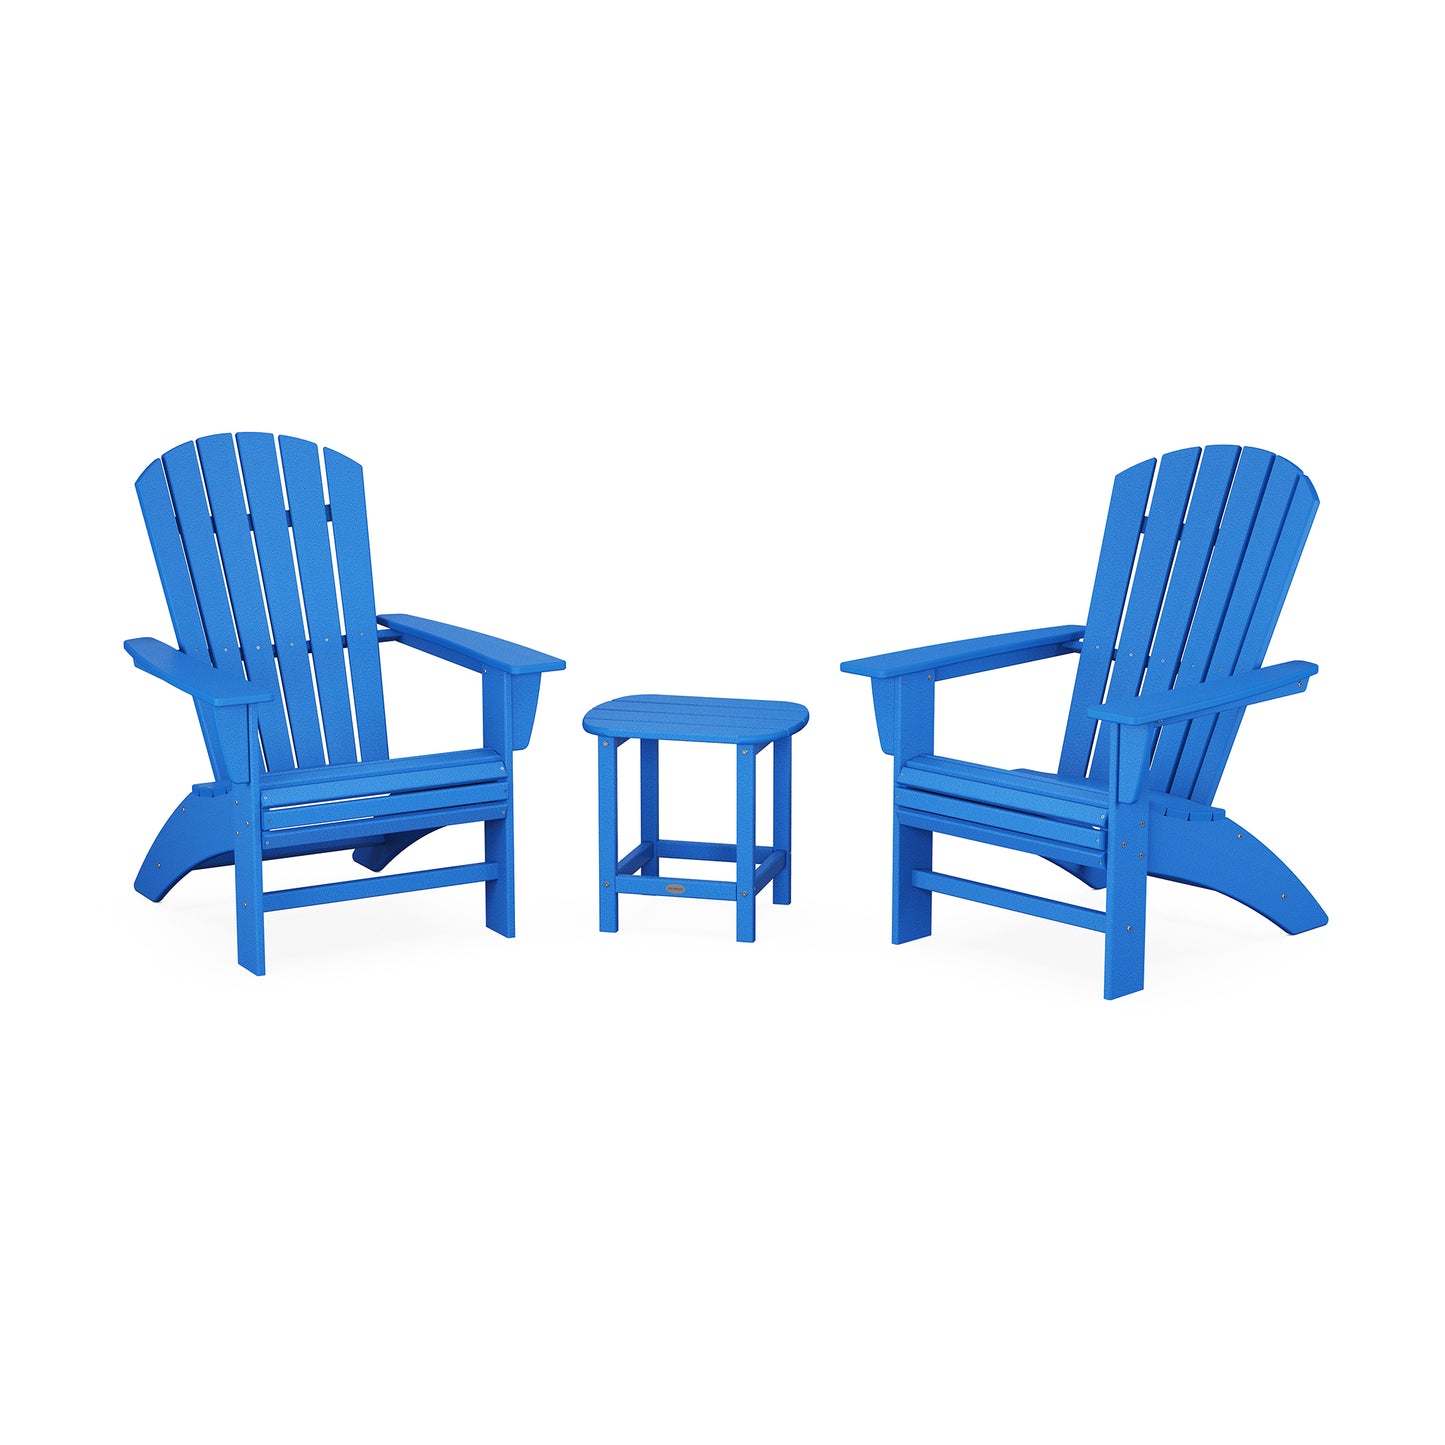 Two blue POLYWOOD Nautical 3-Piece Curveback Adirondack Sets with a matching small side table, set against a plain white background.